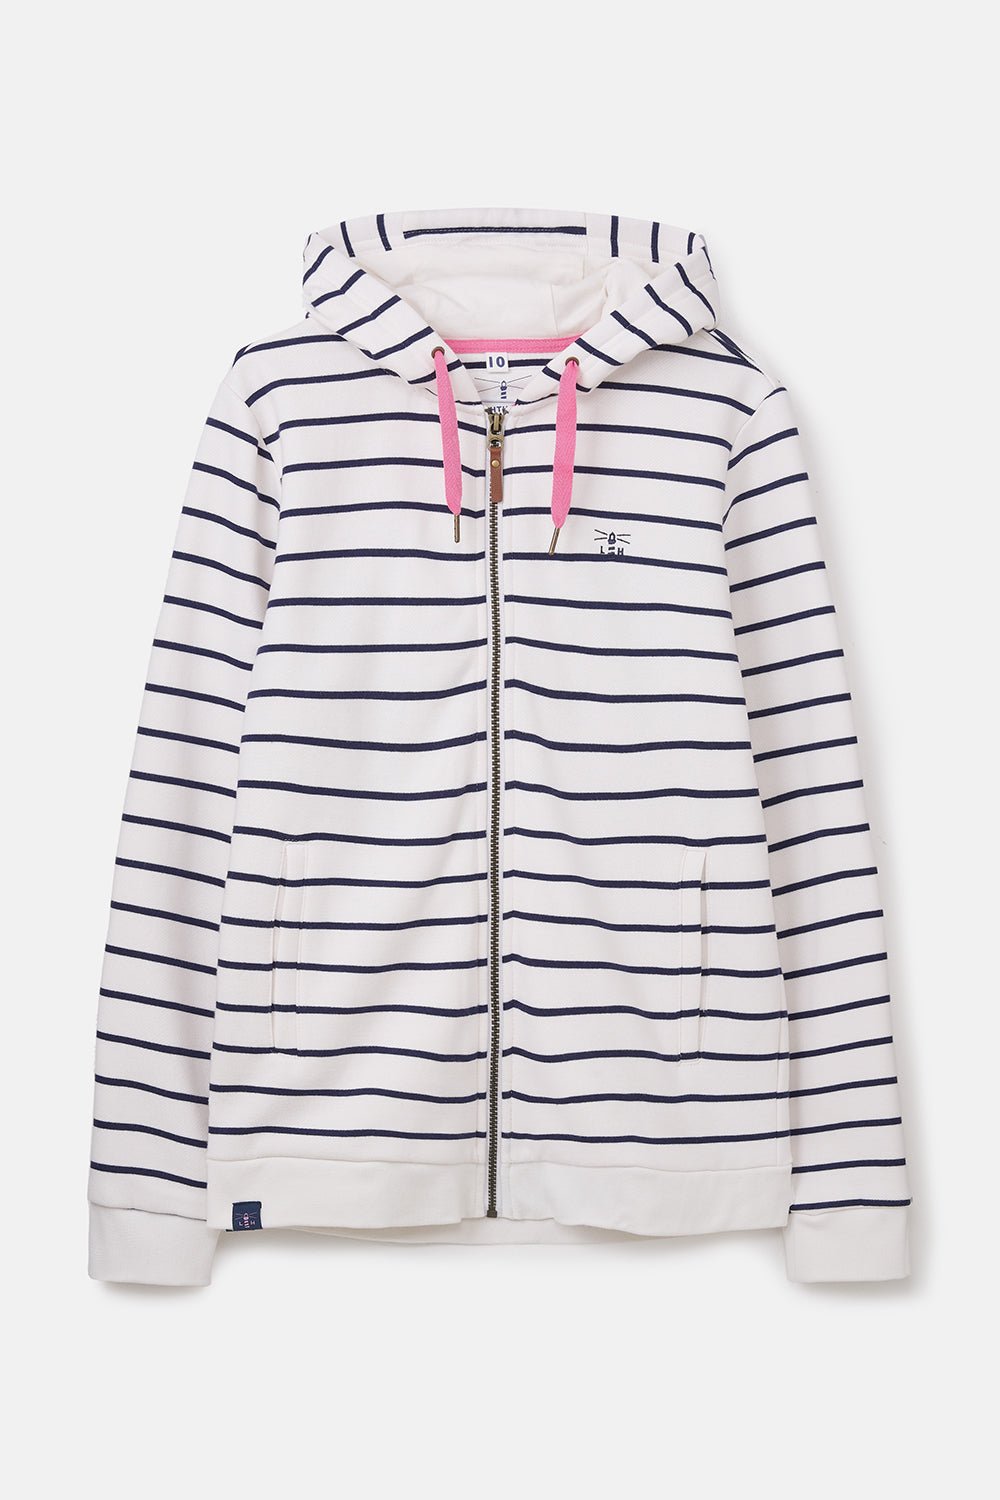 Strand Hooded Top - Navy Striped-Lighthouse